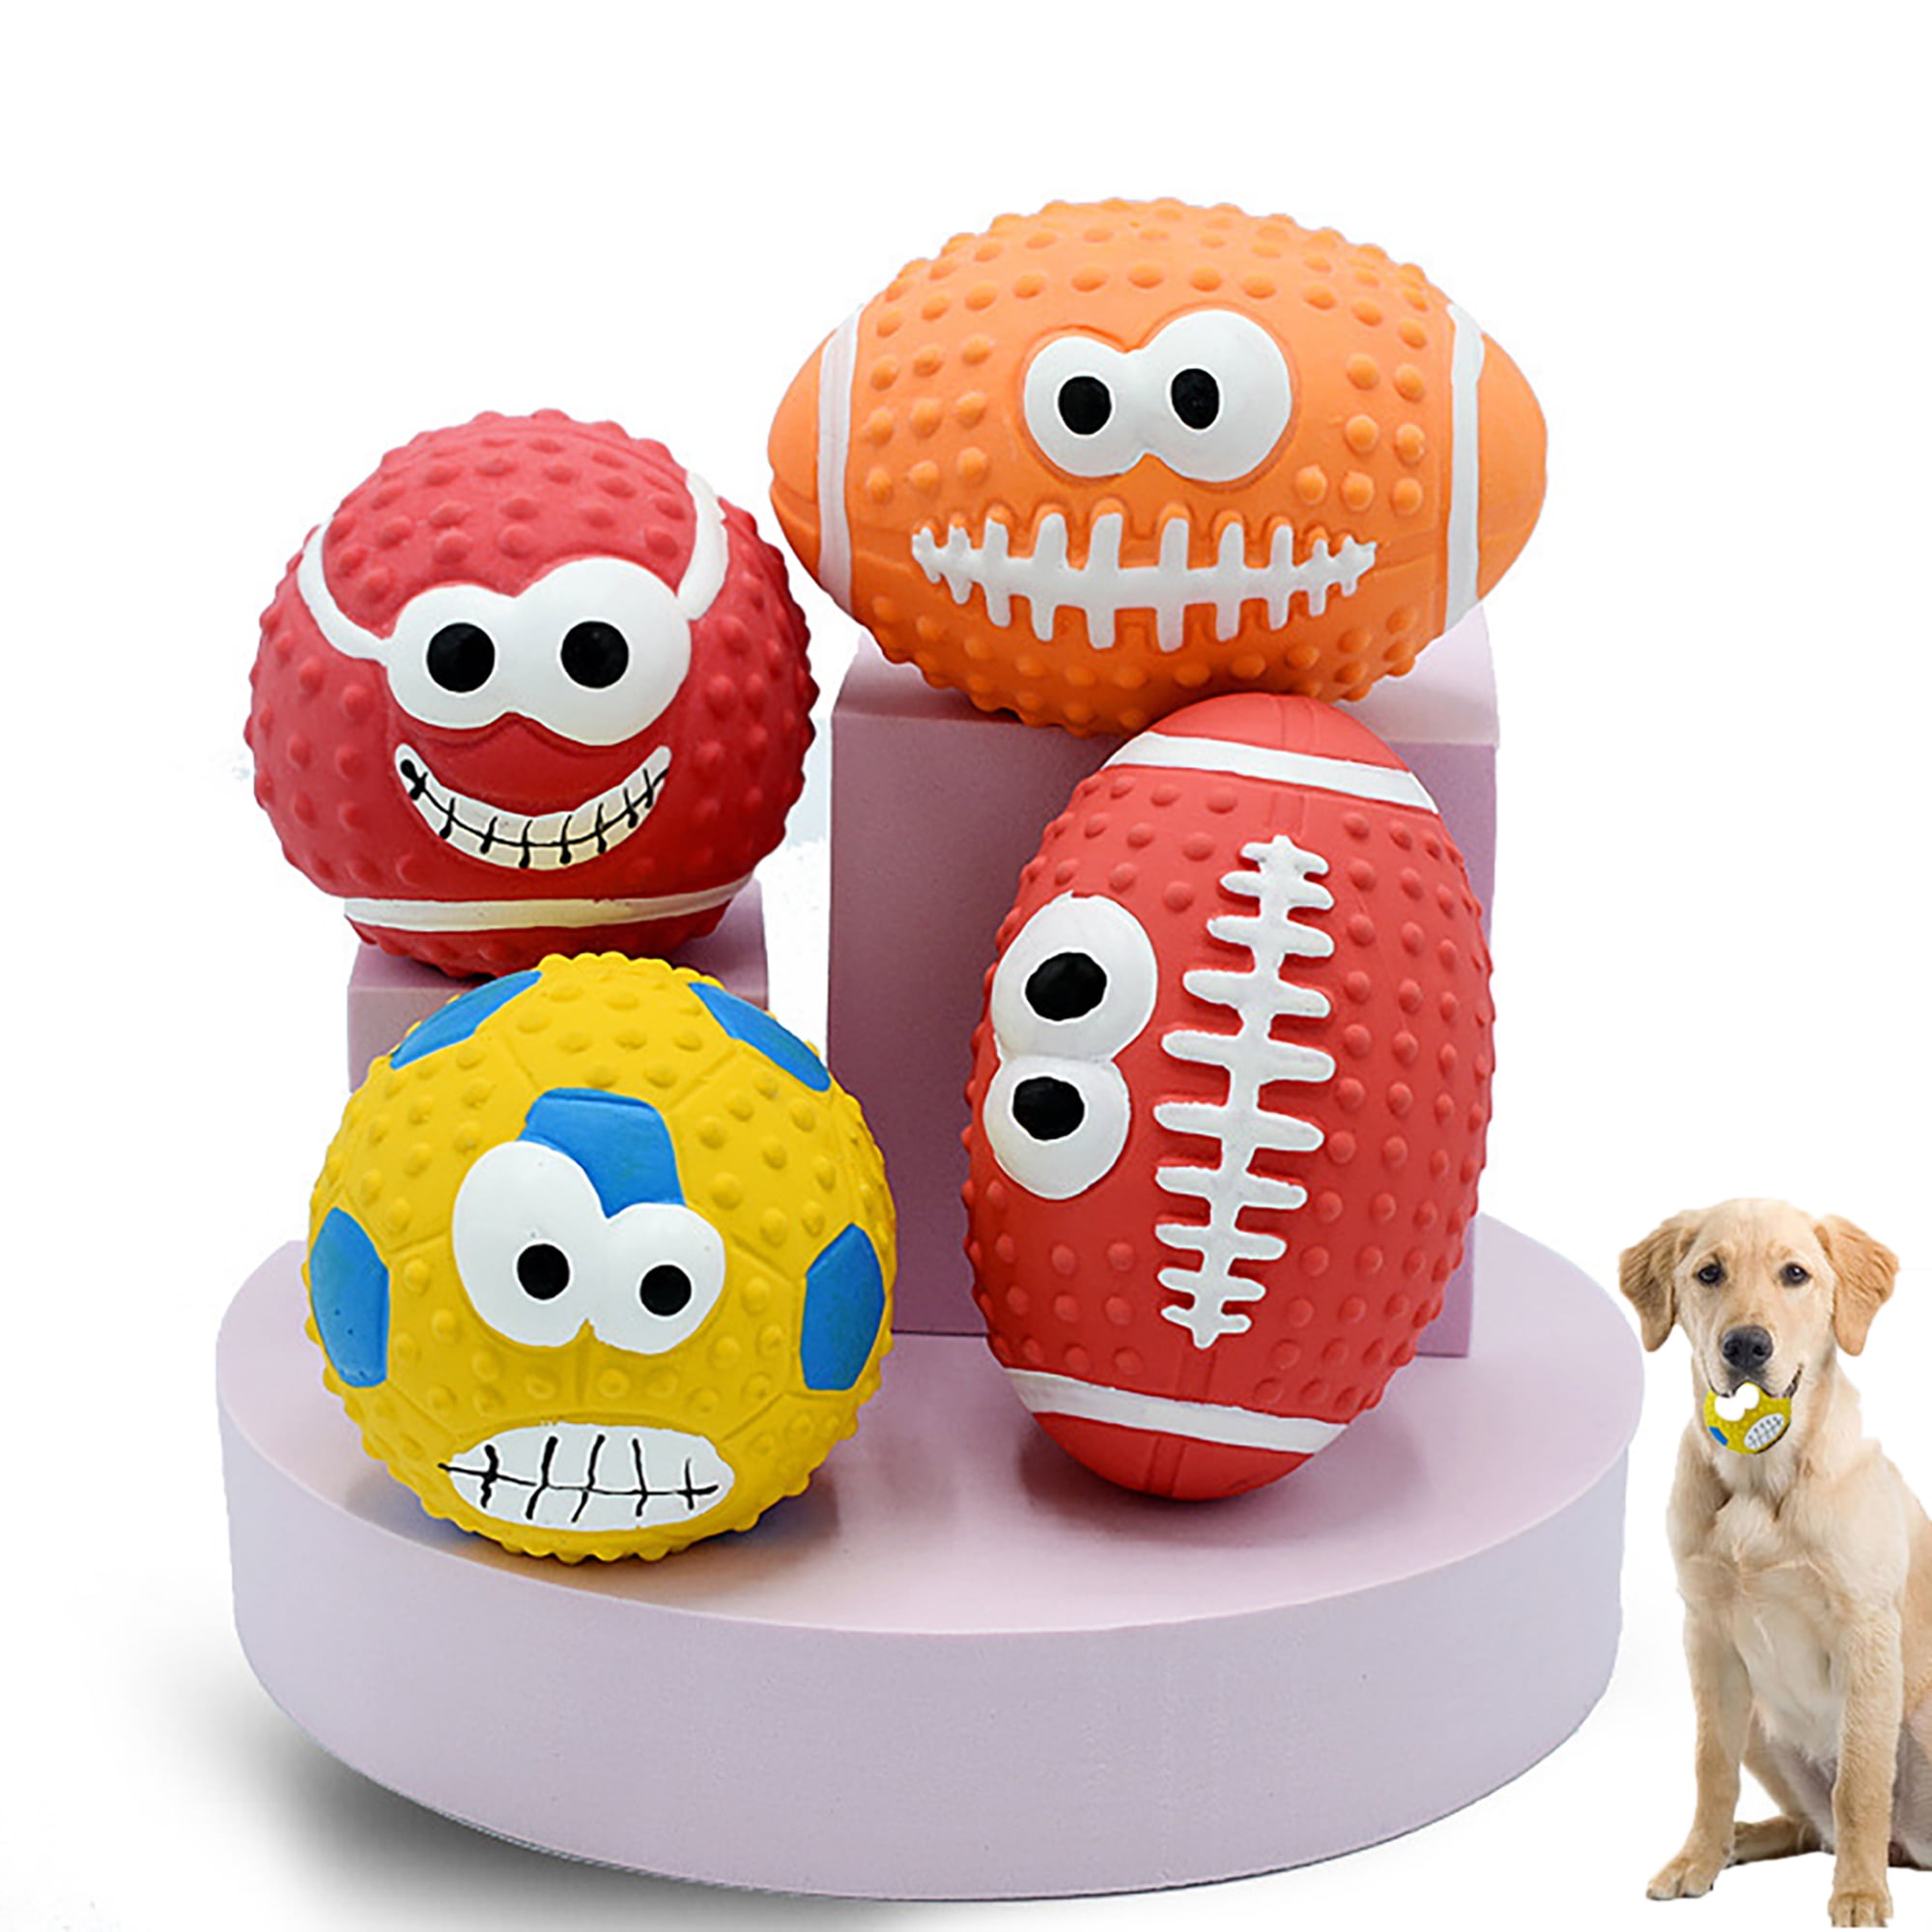 Capsule Dog Toys Puppy Treats Ball Interactive Pet Toy For Small Dogs  Rubber Leaking Ball Pomerian Puzzle Training Accessories - Dog Toys -  AliExpress